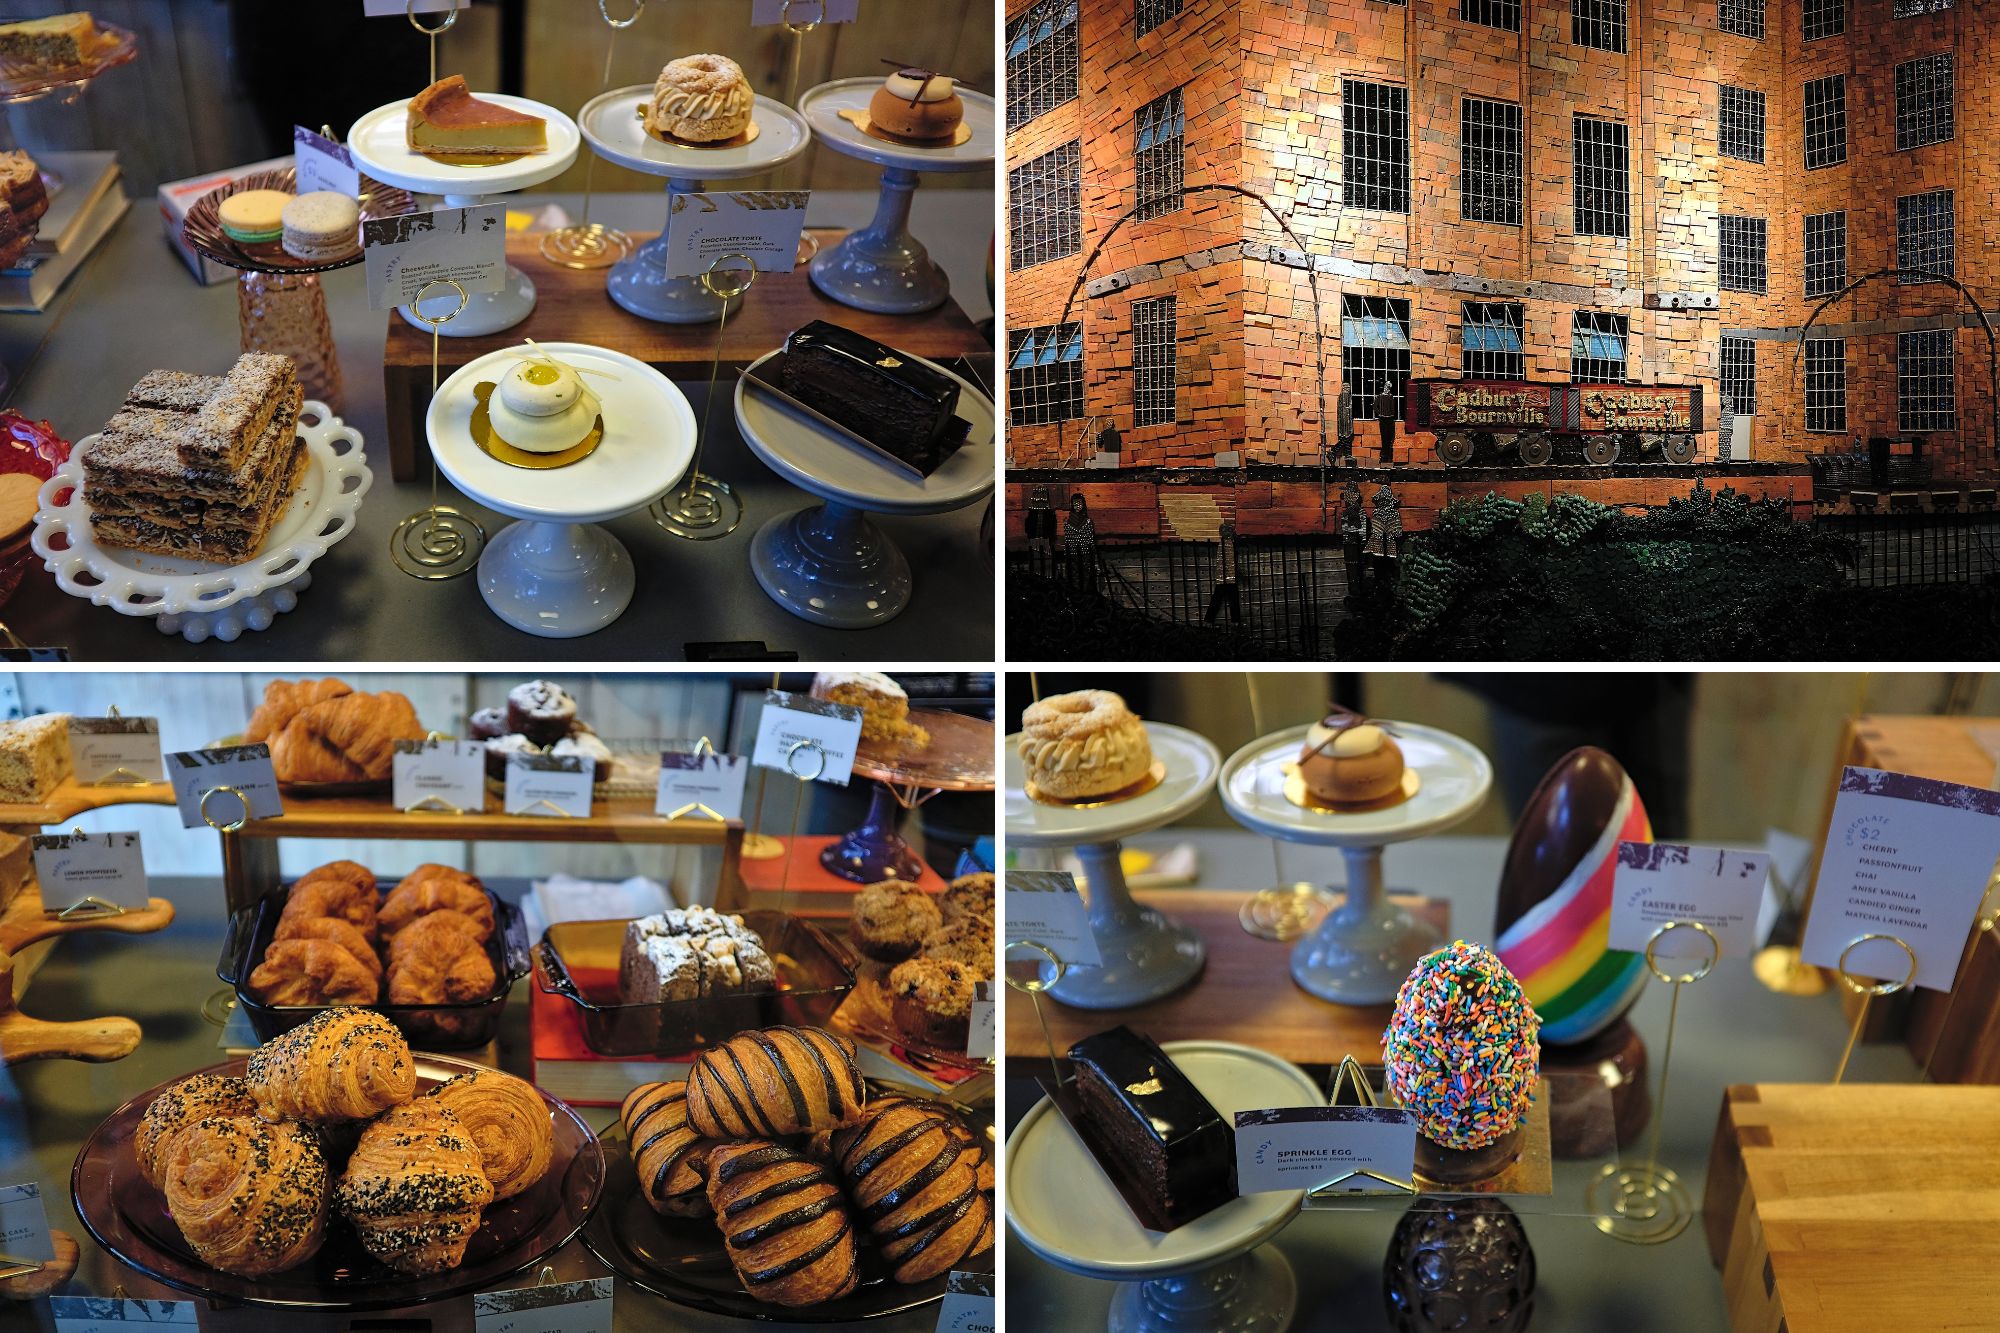 A collage of pastries and the interior of Good Ambler in Mondelēz International